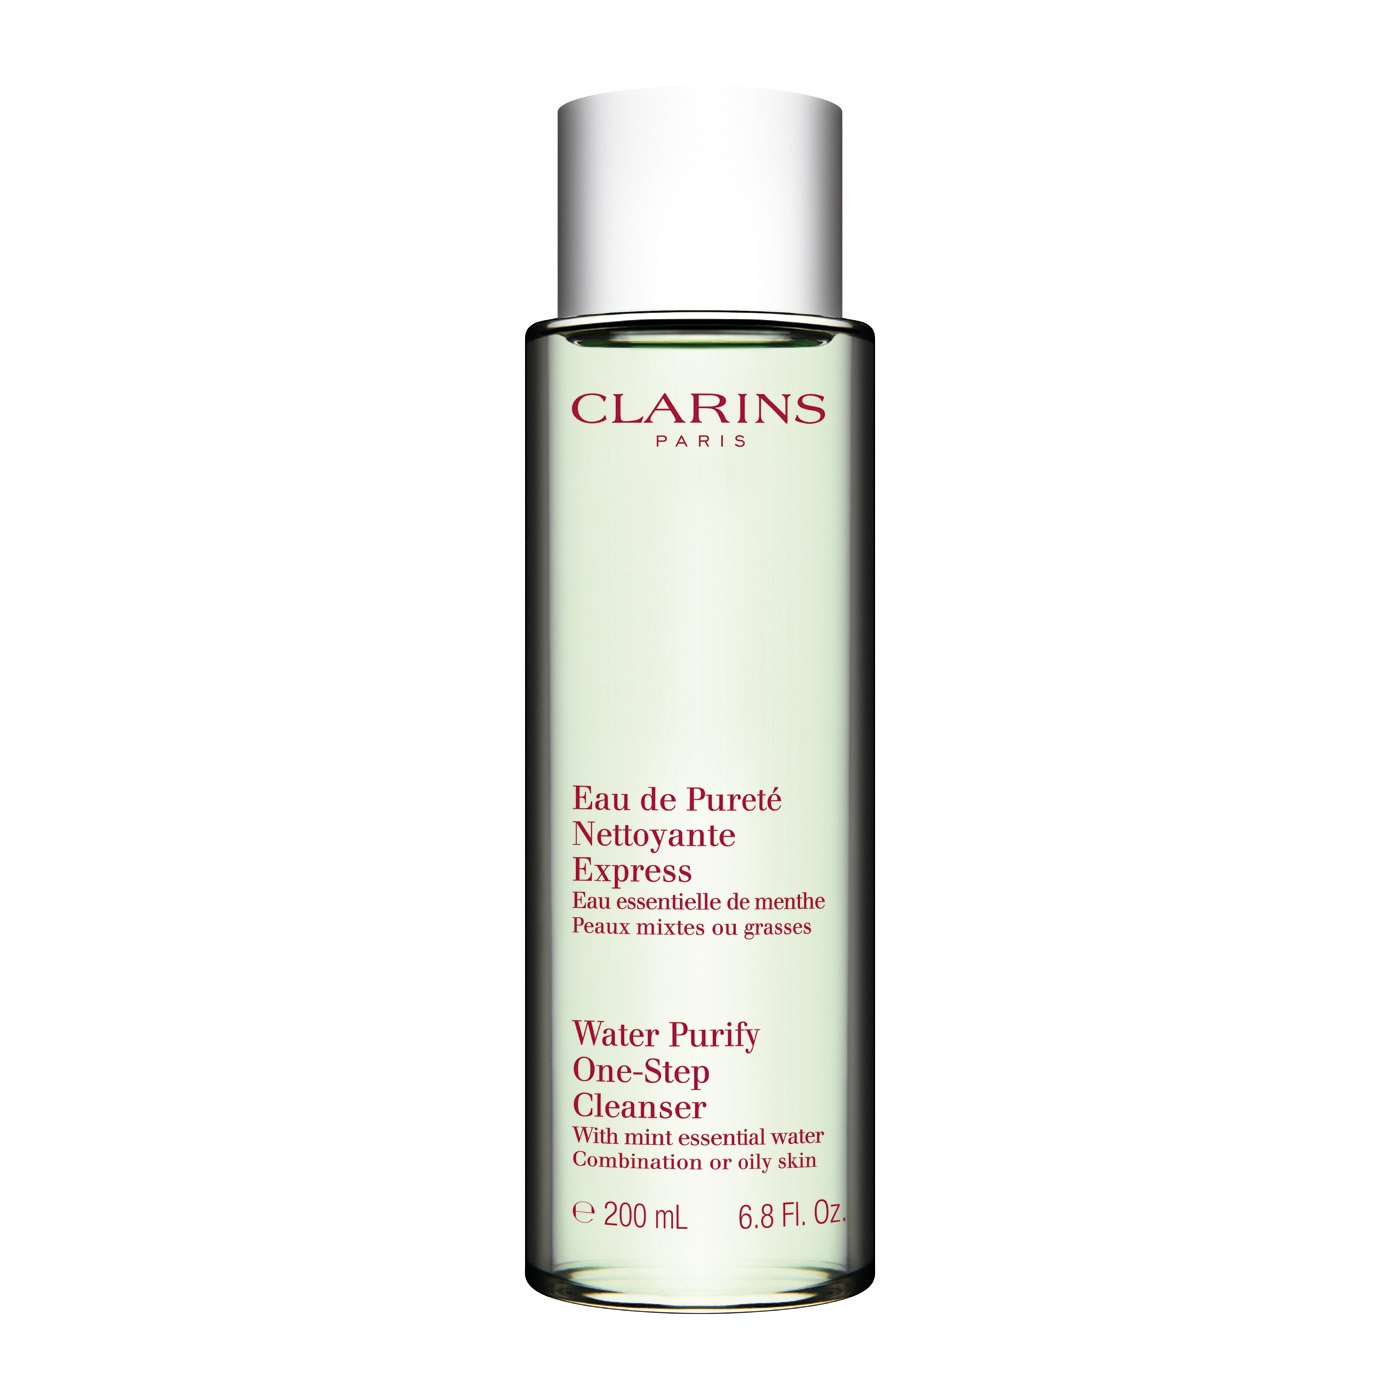 Clarins Water Purify One-Step Cleanser - Combination/Oily Skin (200ml / 6.8fl.oz)